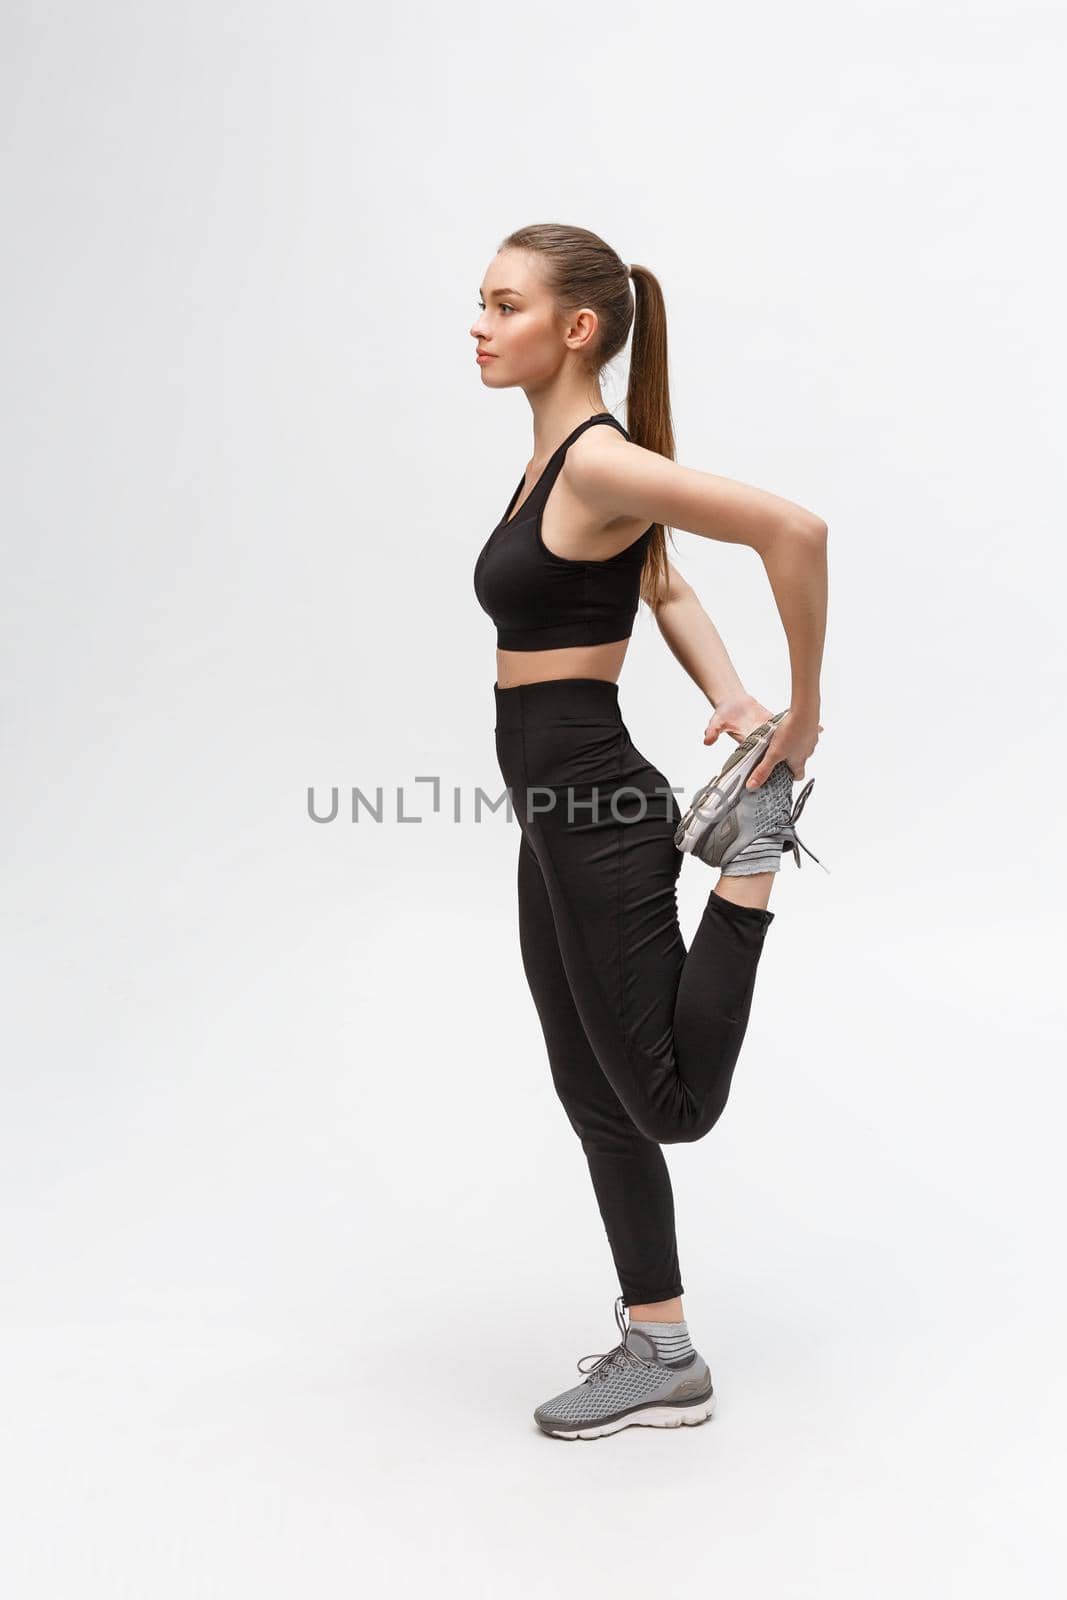 Portrait of happy sports woman stretching legs on the floor isolated on a white background